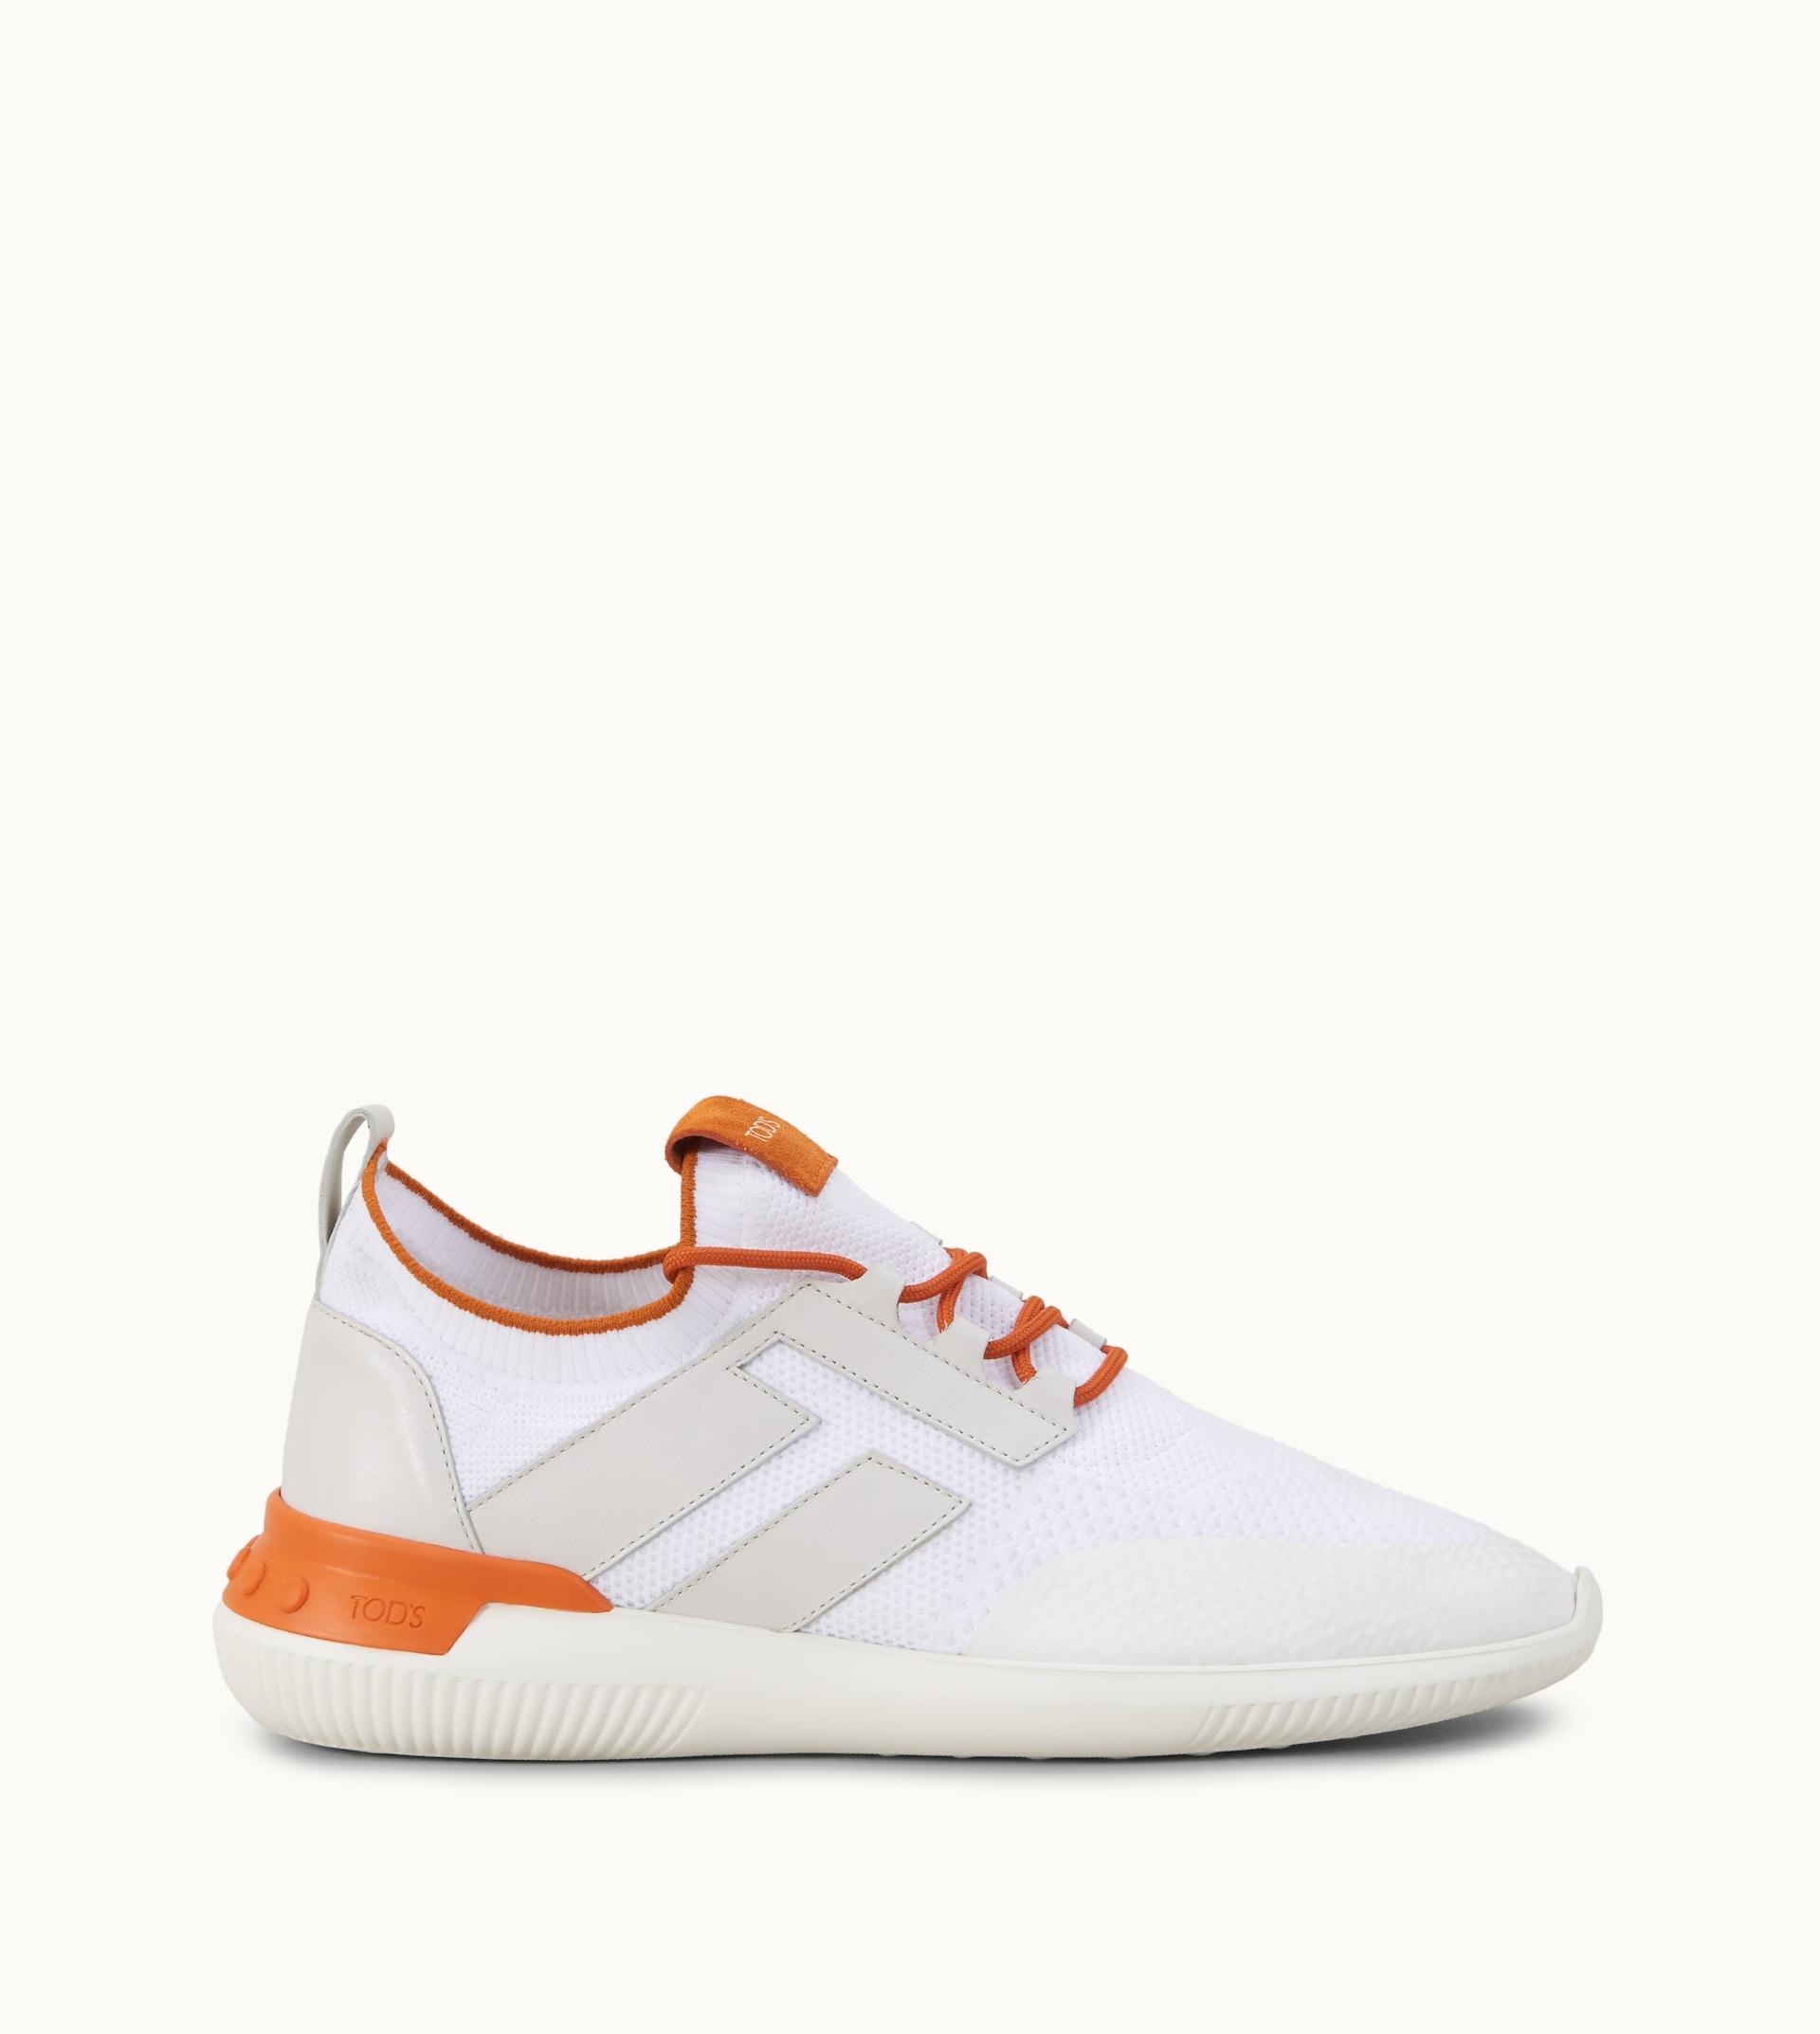 Tod's Leather No_code_02 Sneakers in Orange,White (White) for Men 